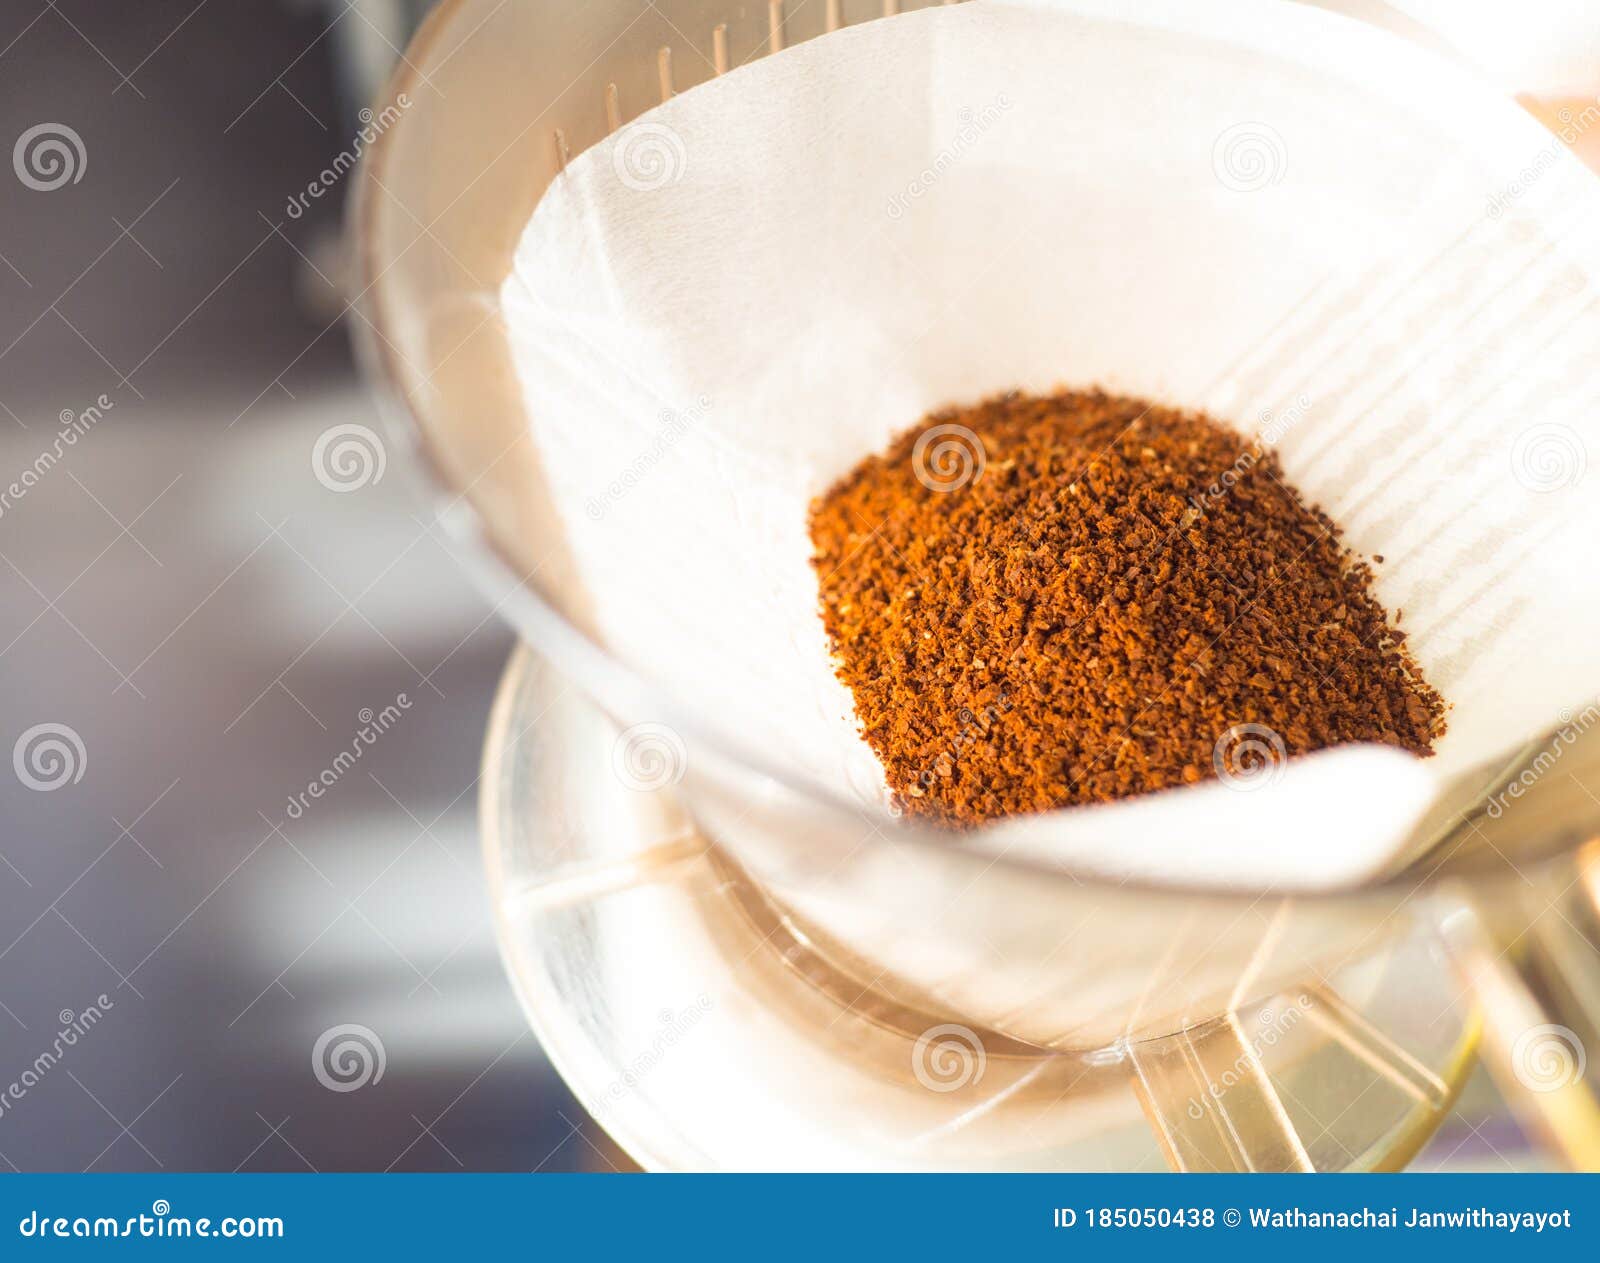 coffee powder obtained by grinding on filter paper and cups for dripping coffee